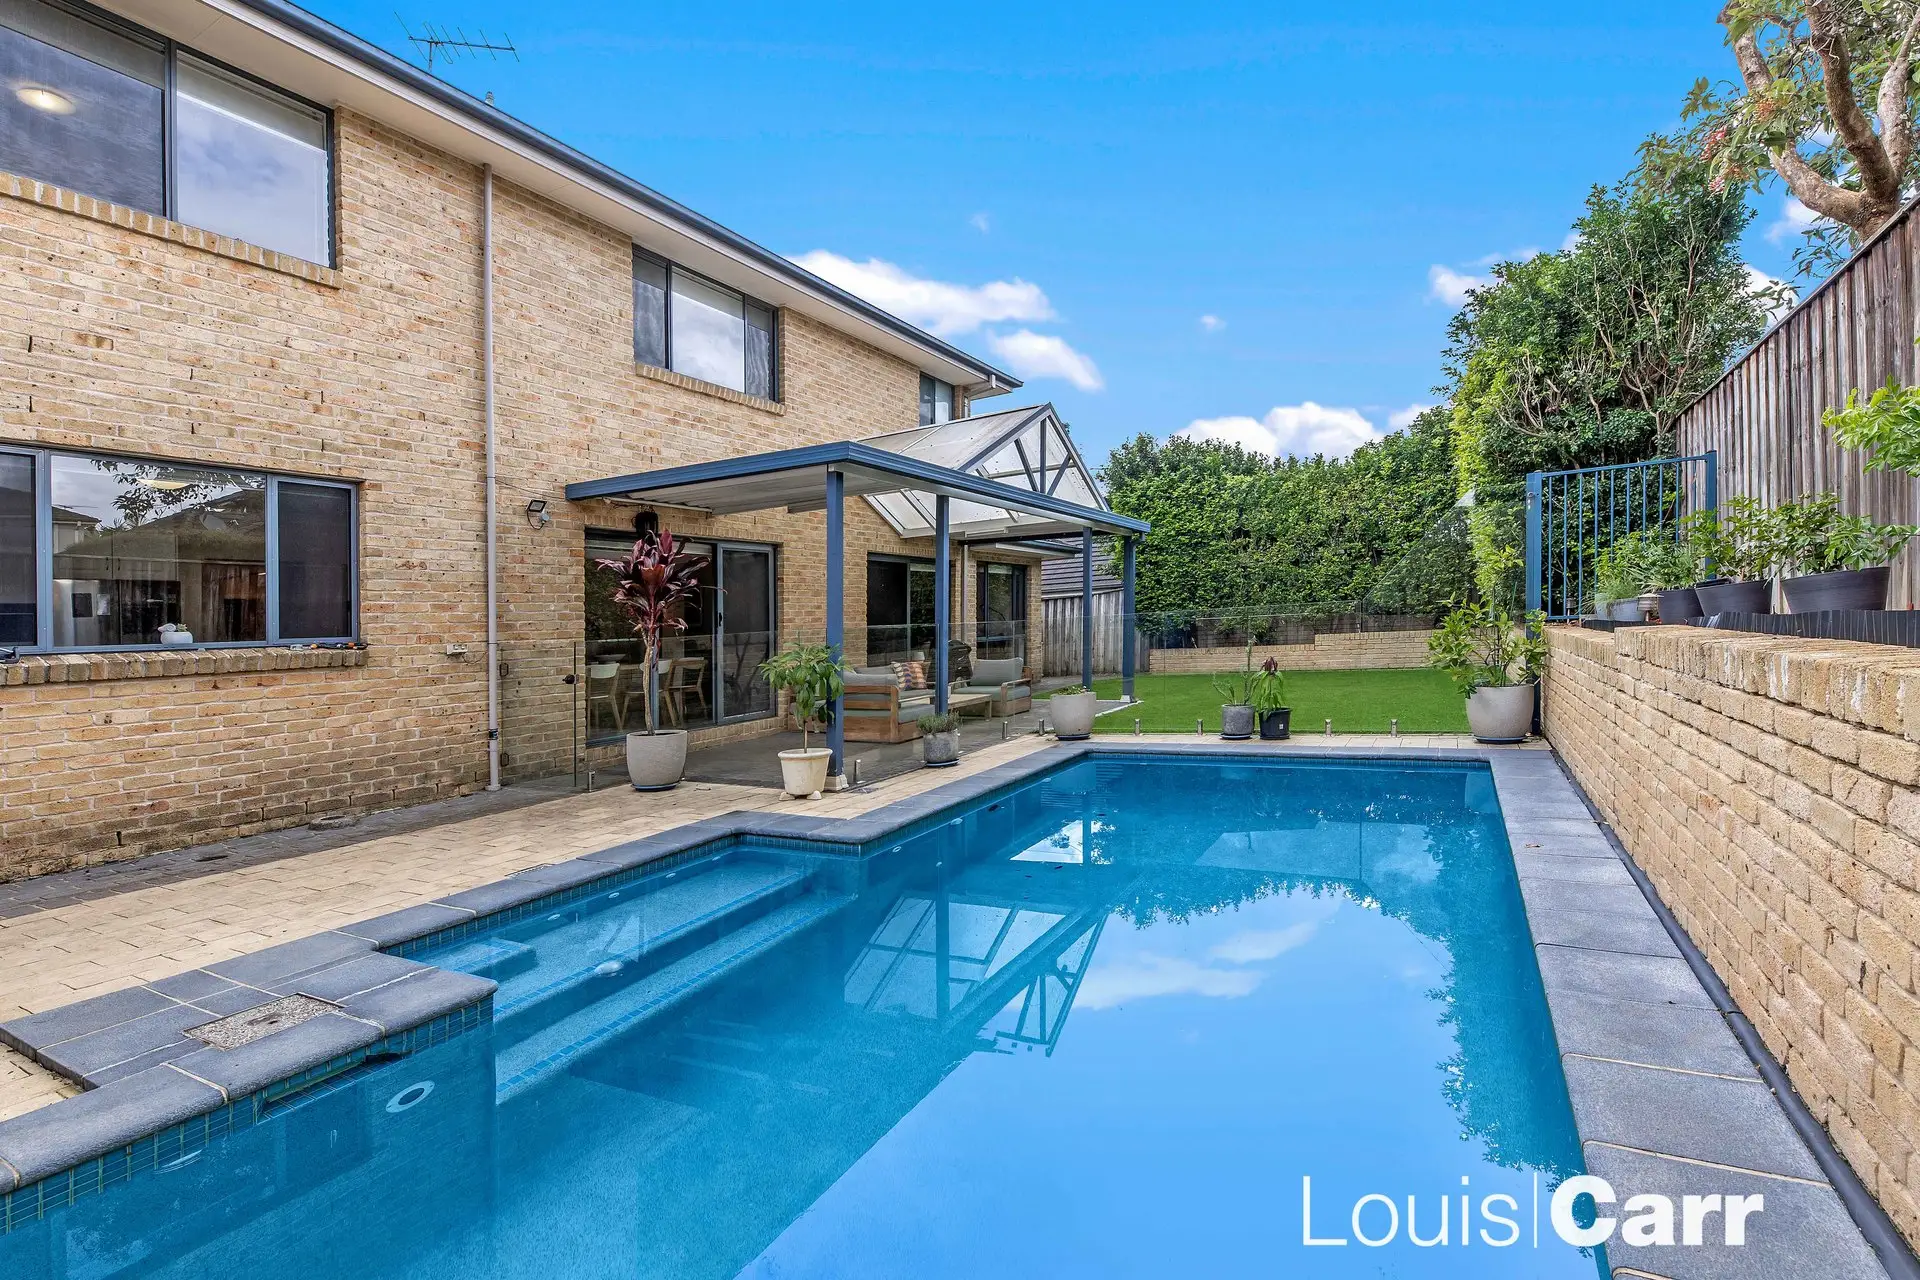 Photo #14: 23 Queensbury Avenue, Kellyville - Sold by Louis Carr Real Estate